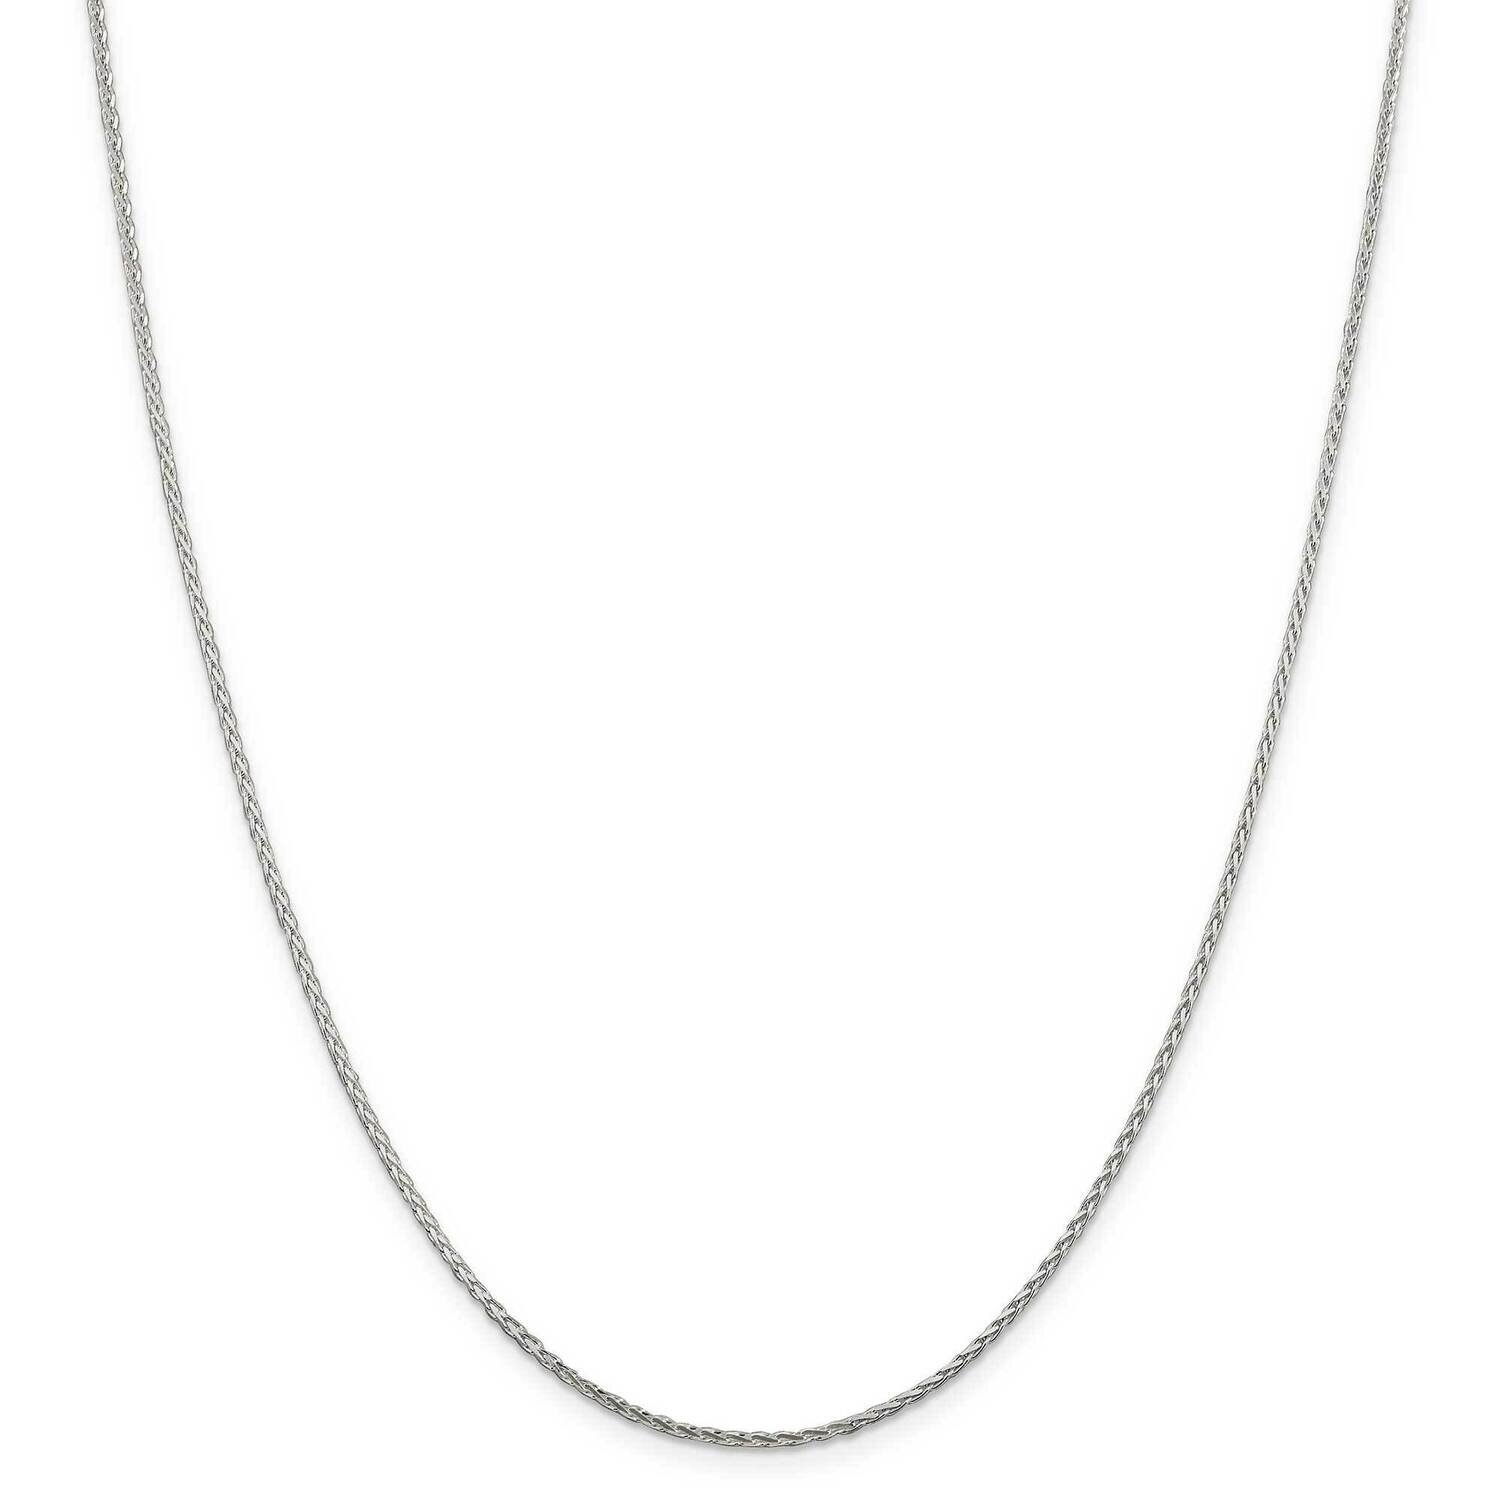 1.5mm Diamond-Cut Round Spiga Chain with 4 Inch Extender 22 Inch Sterling Silver QSR040E-22